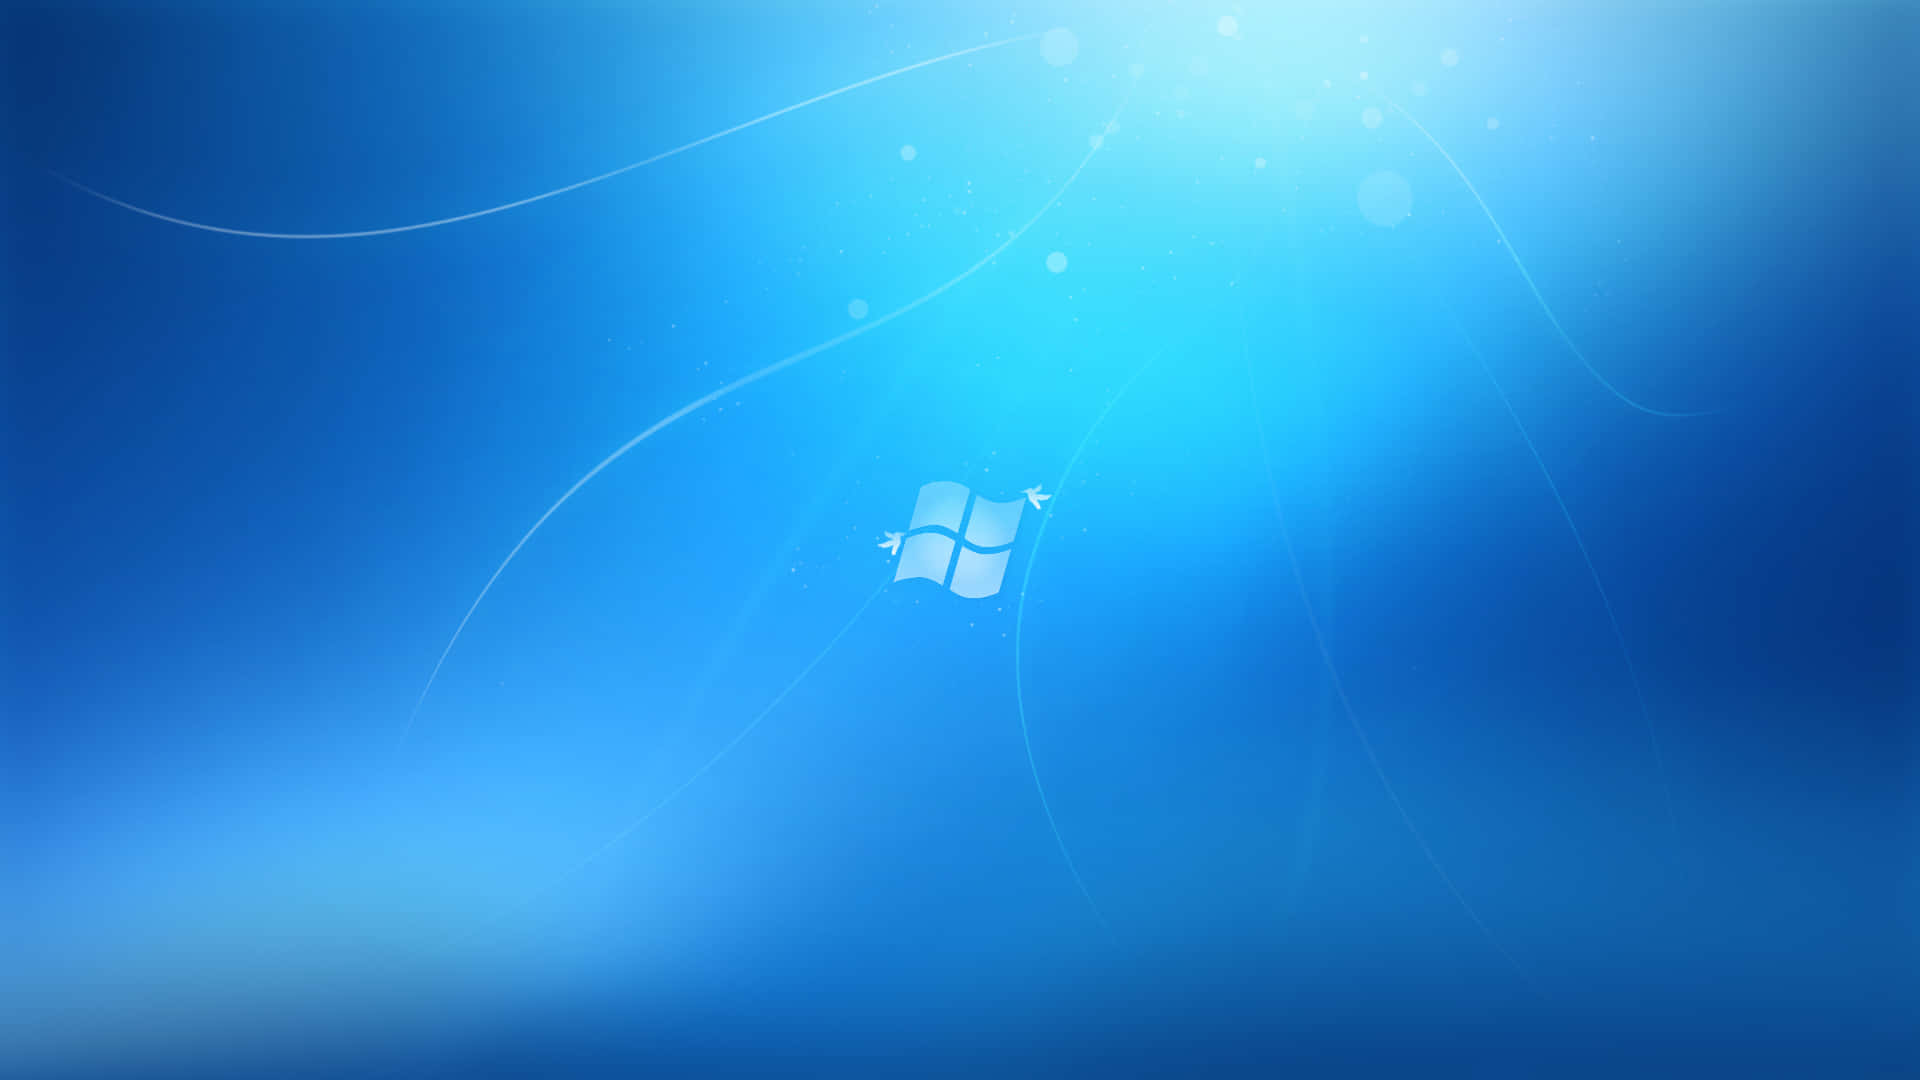 Windows 8 Colorful Tiles Background